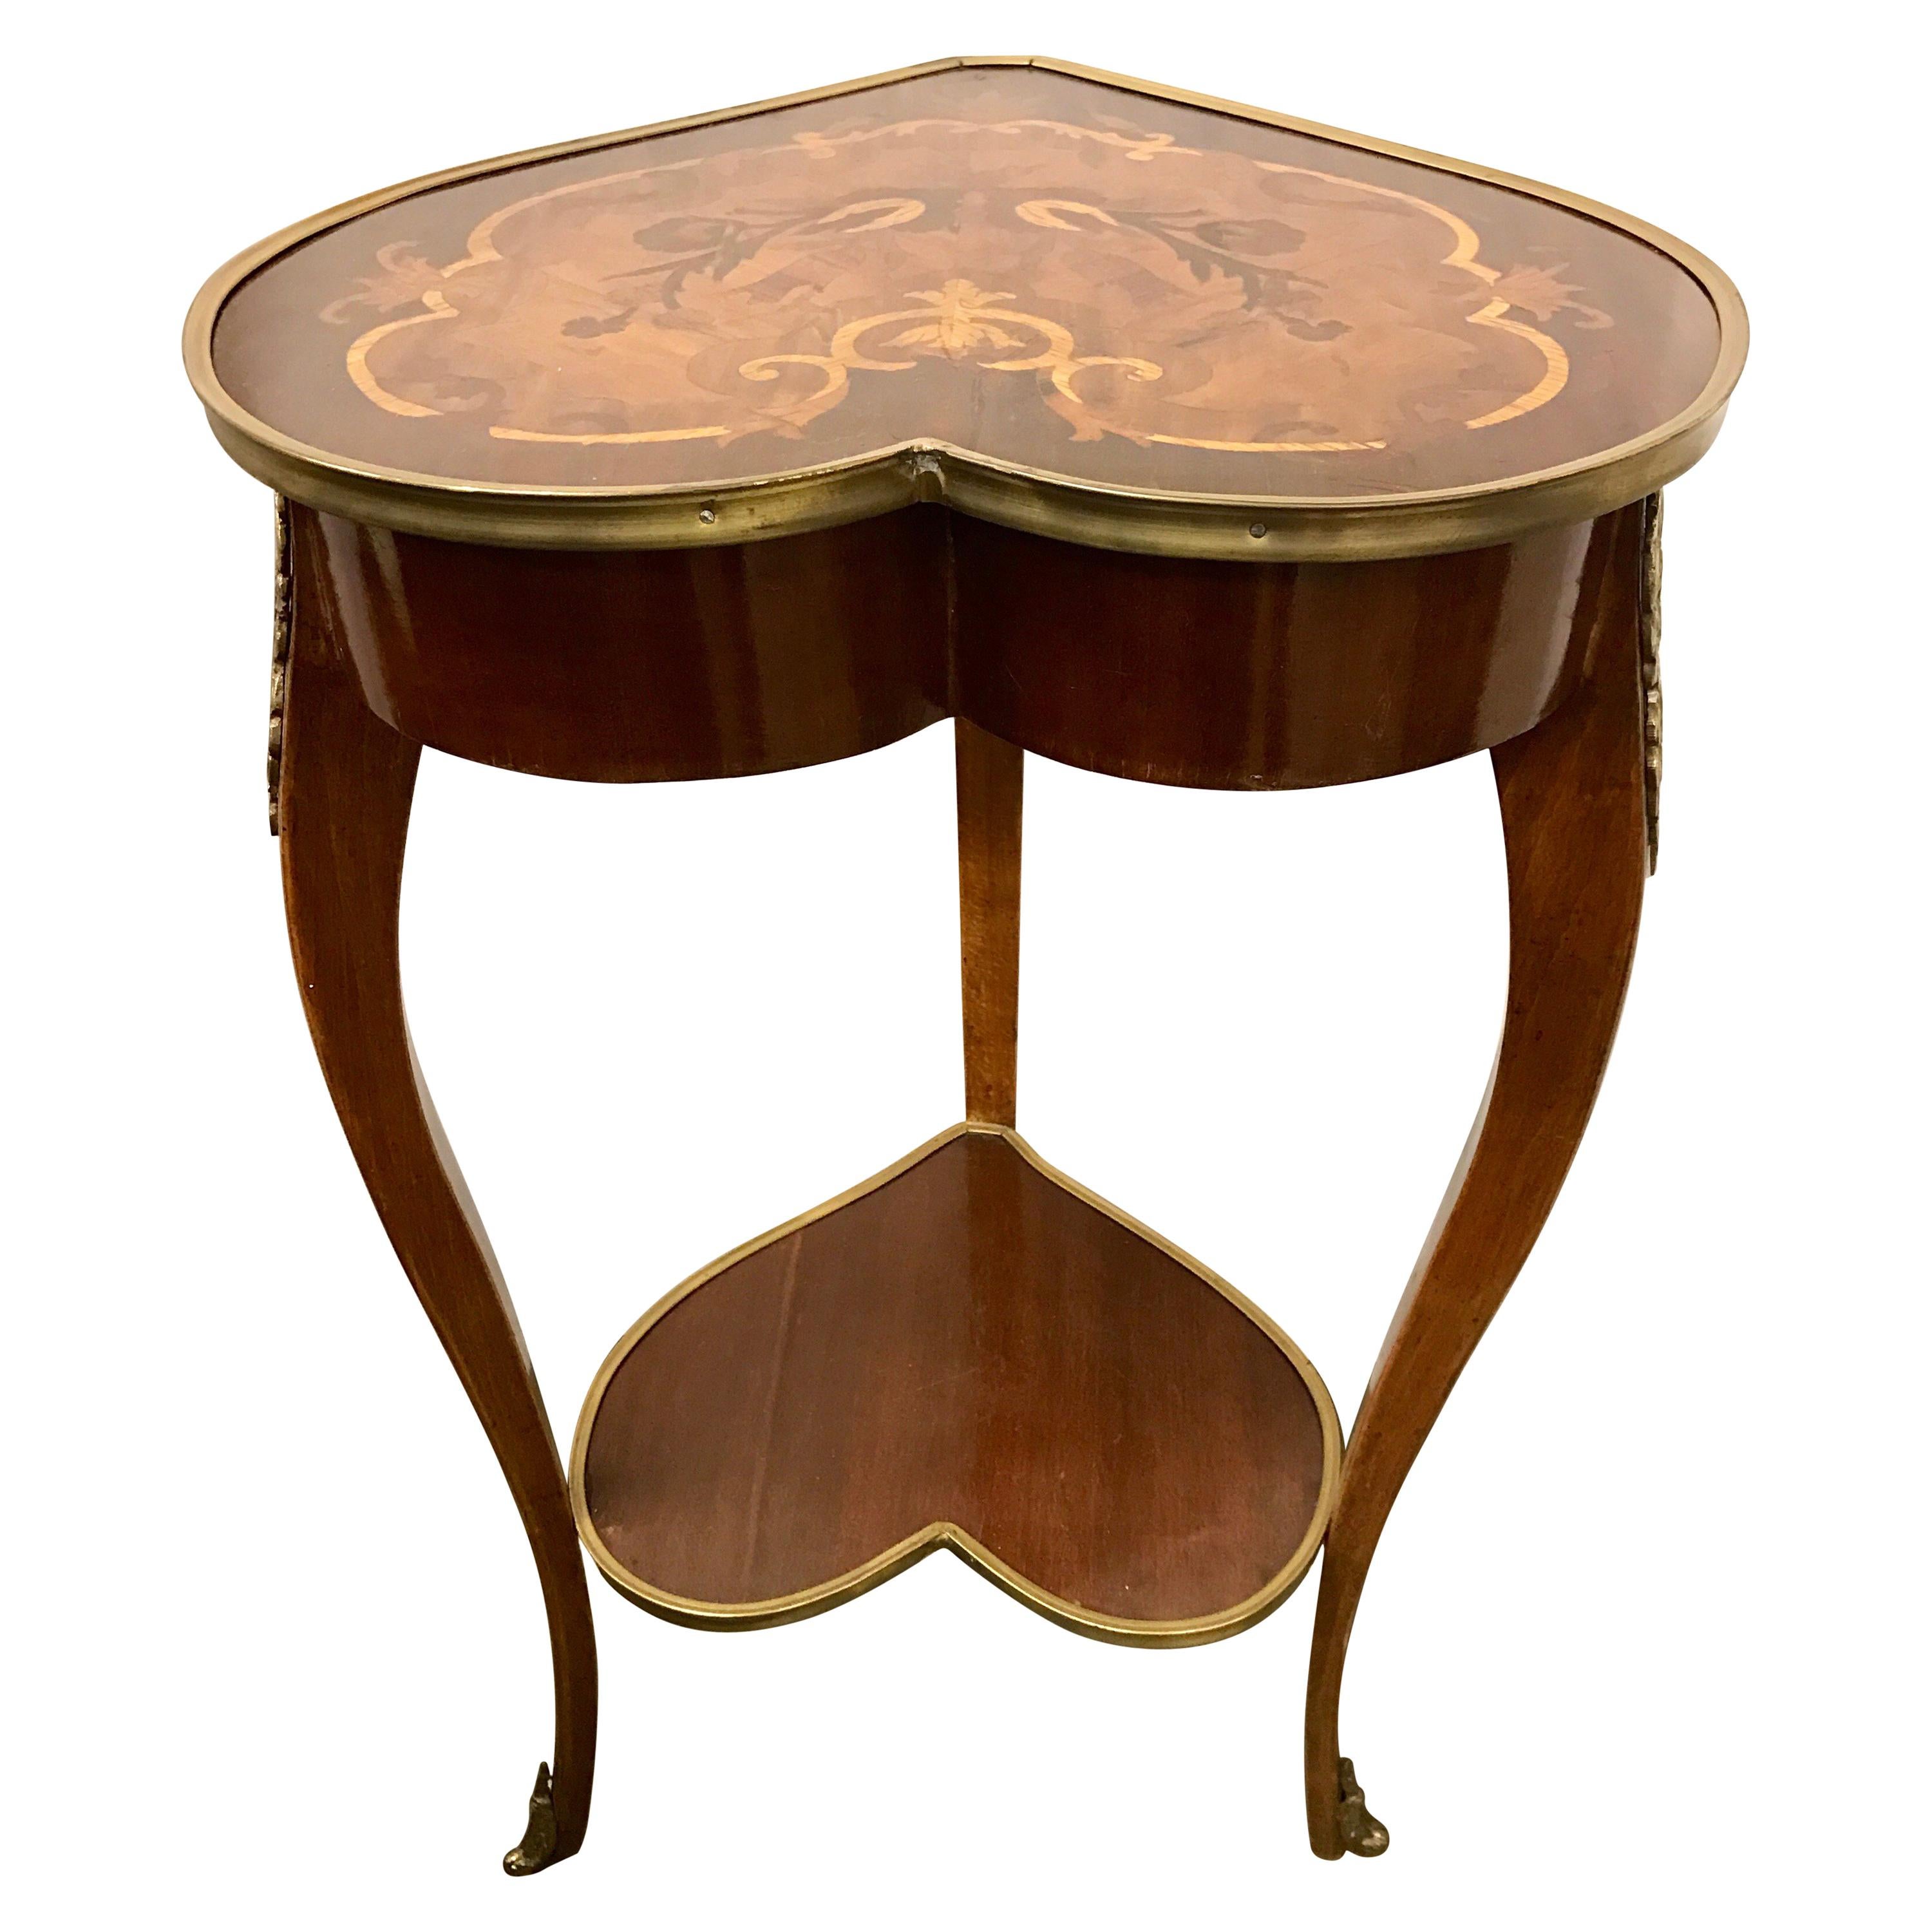 Louis XV Revival Marquetry Inlaid Heart Shaped Table with Bronze Ormolu